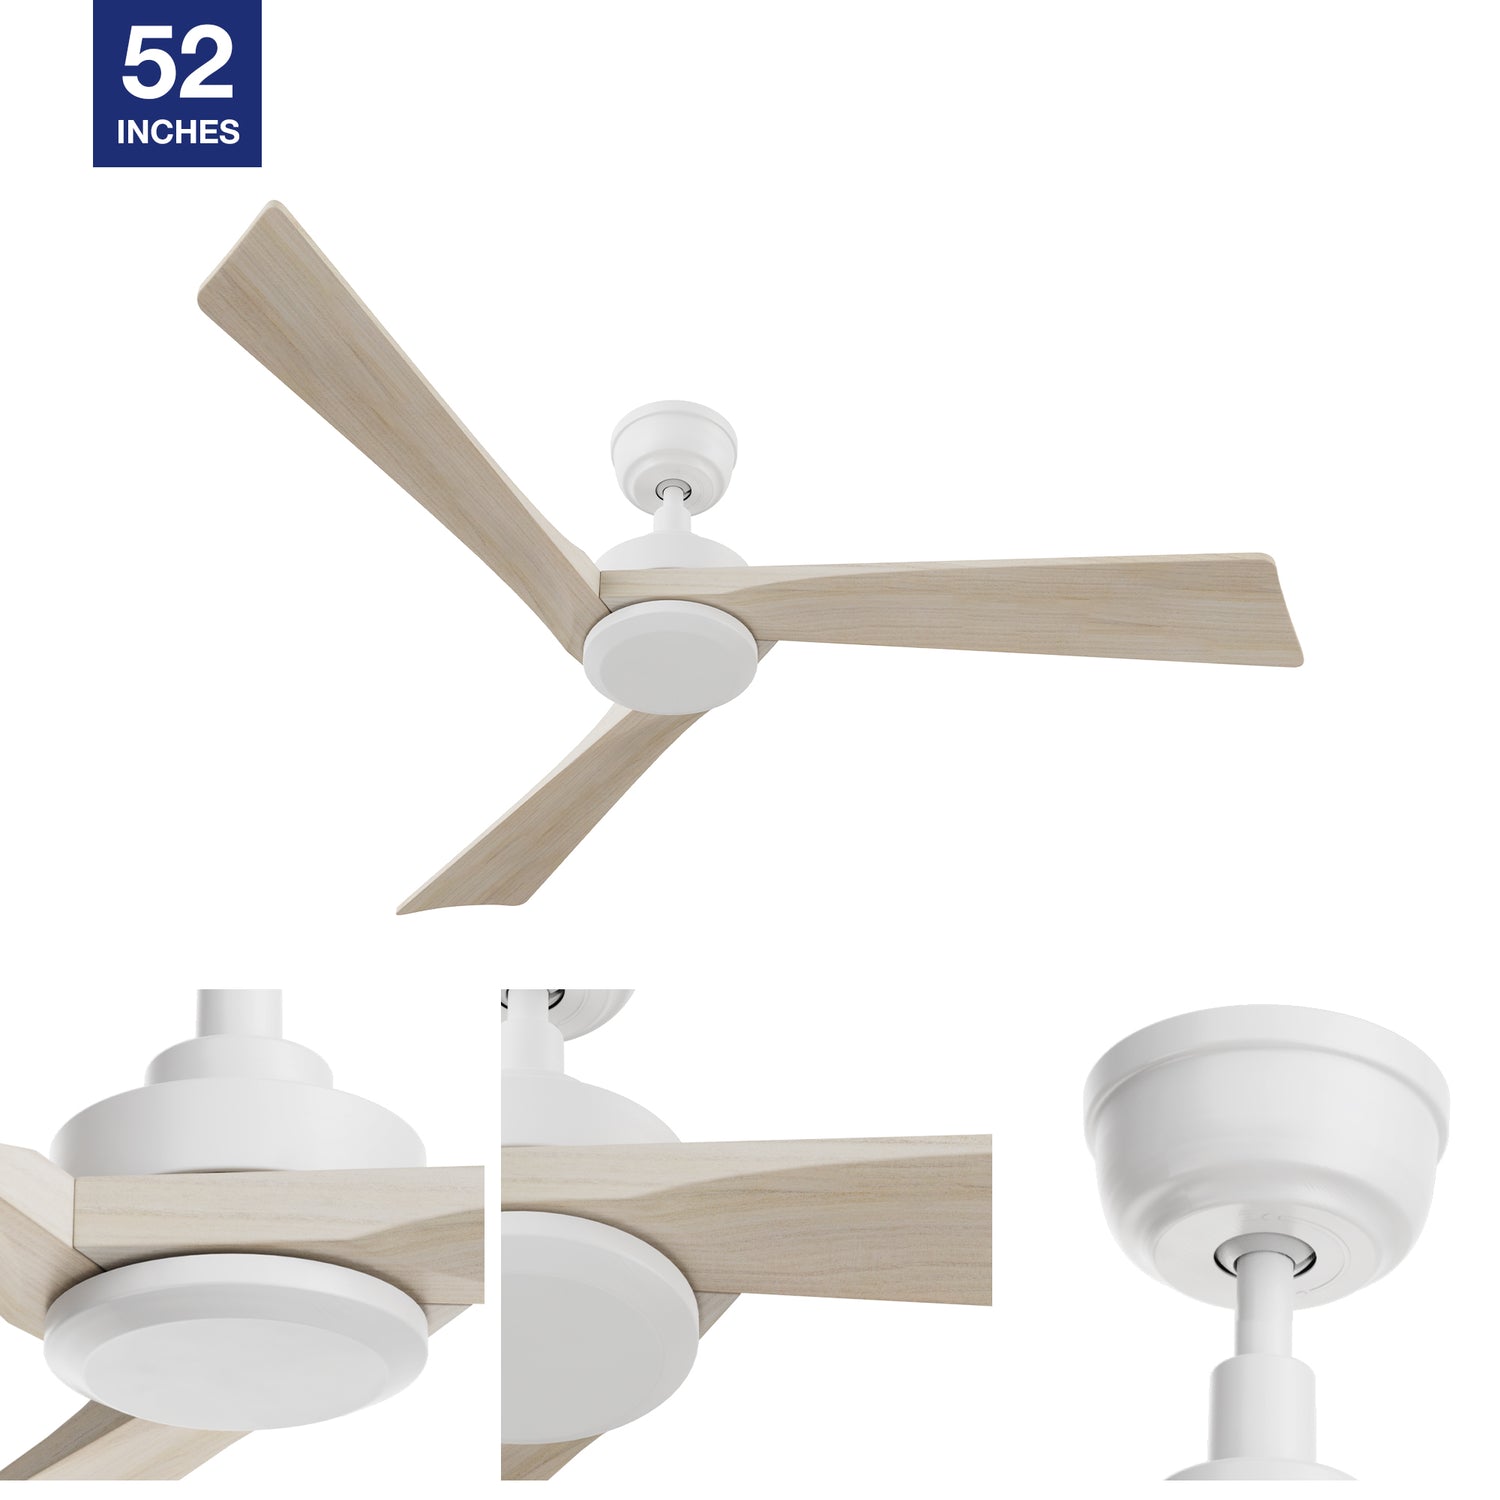 52in modern downrod mounted ceiling fan designs with white downrod and solid wood fan blades. 